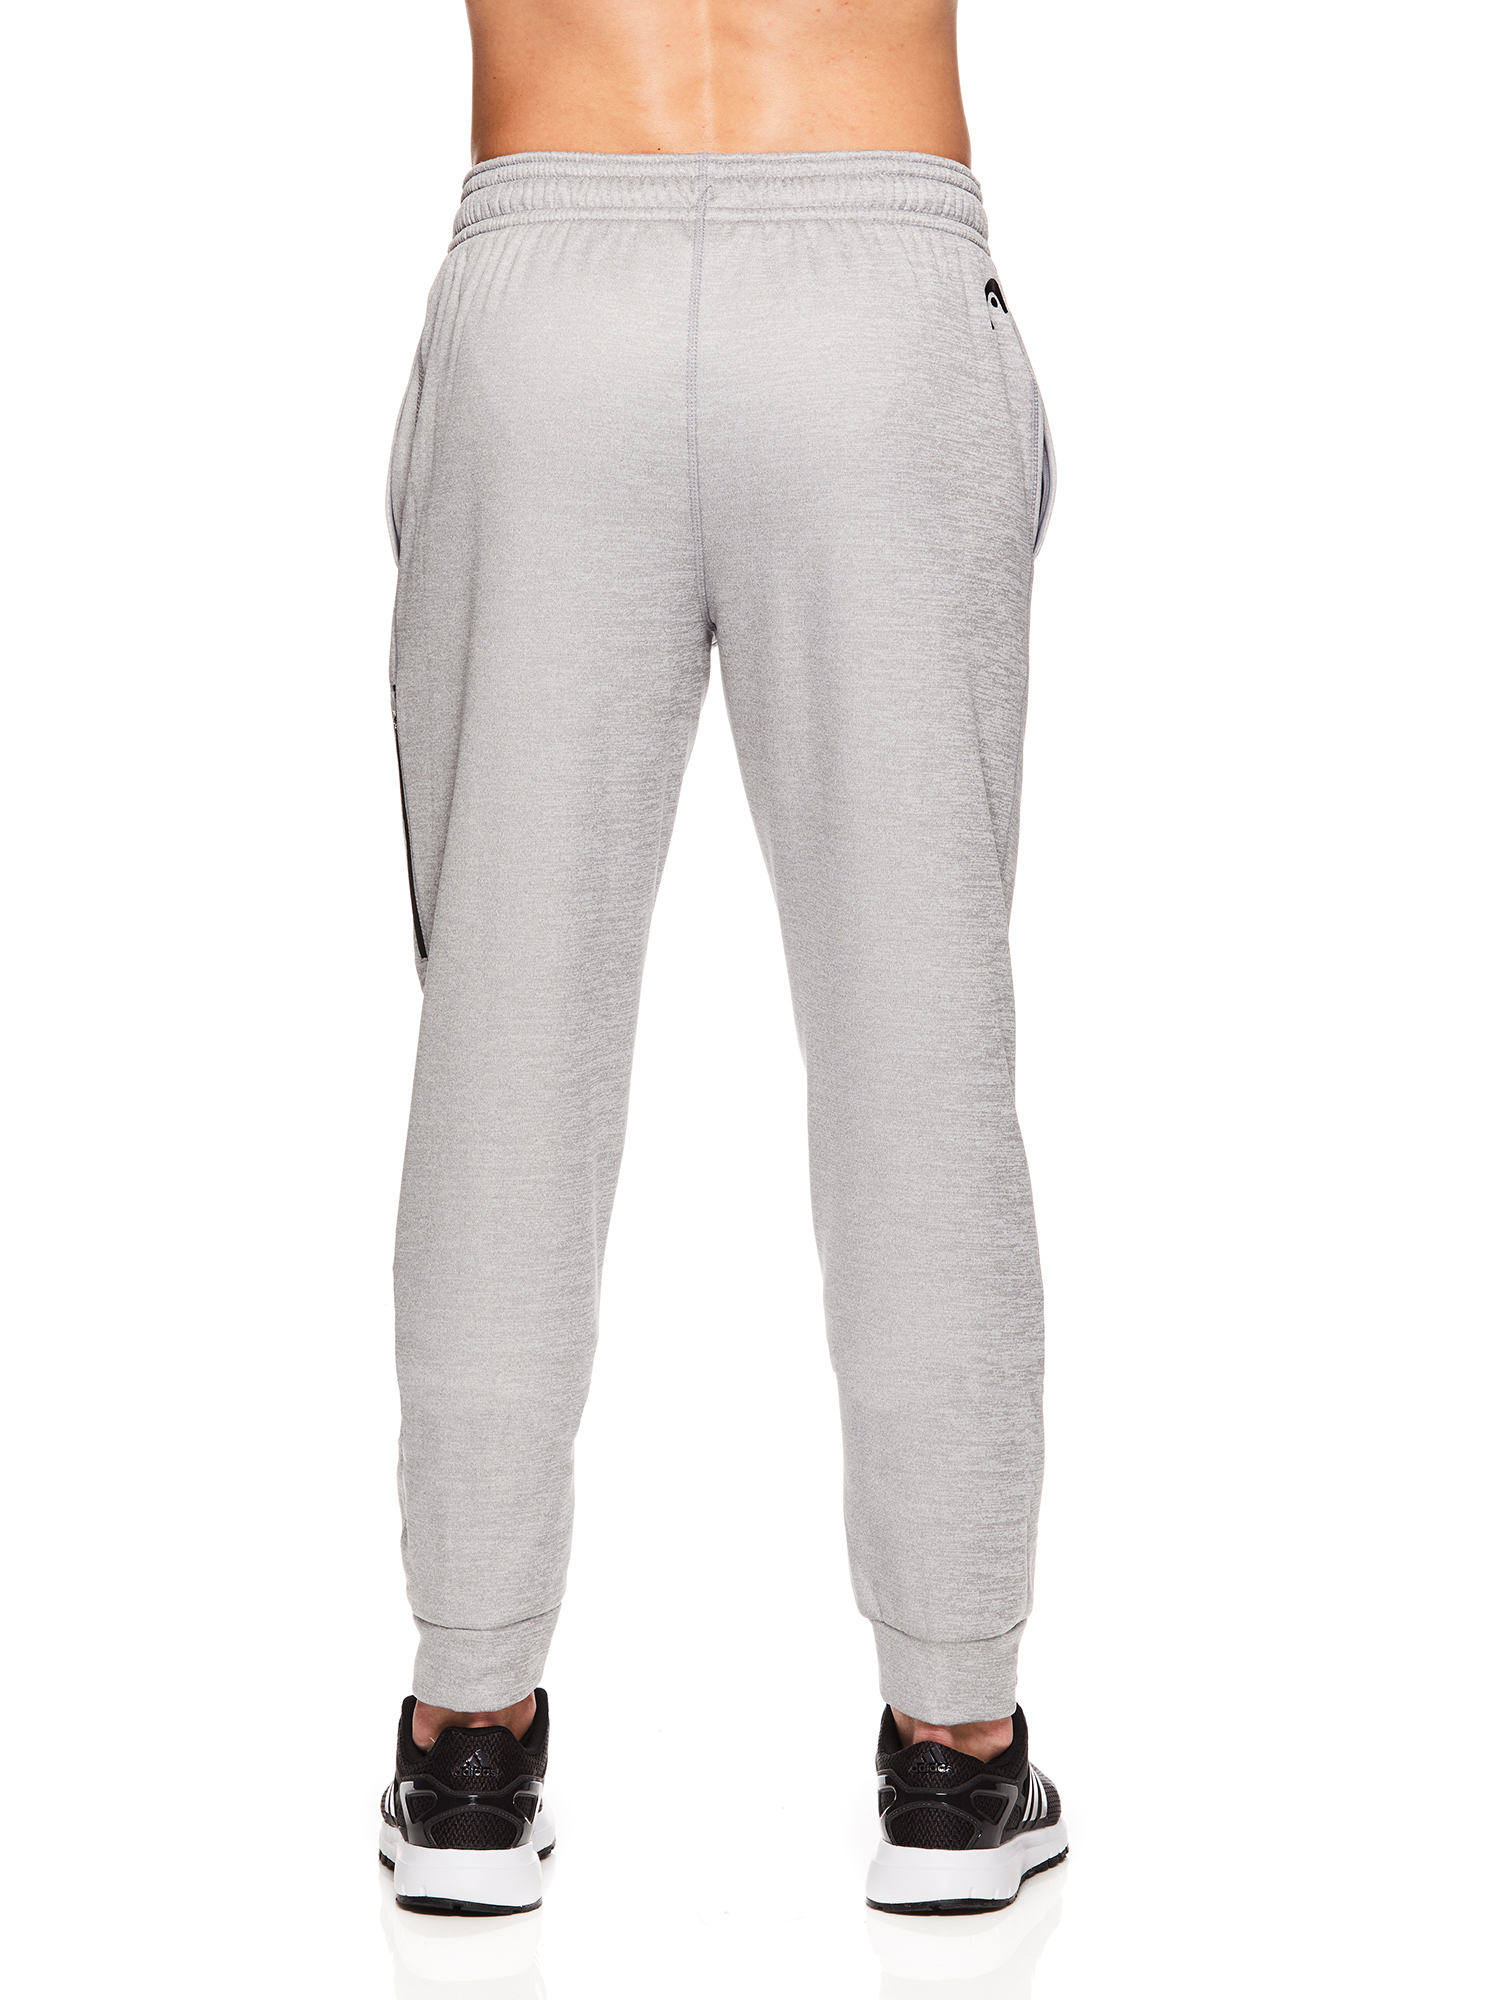 Head Men's Athletic Field Joggers - image 3 of 3